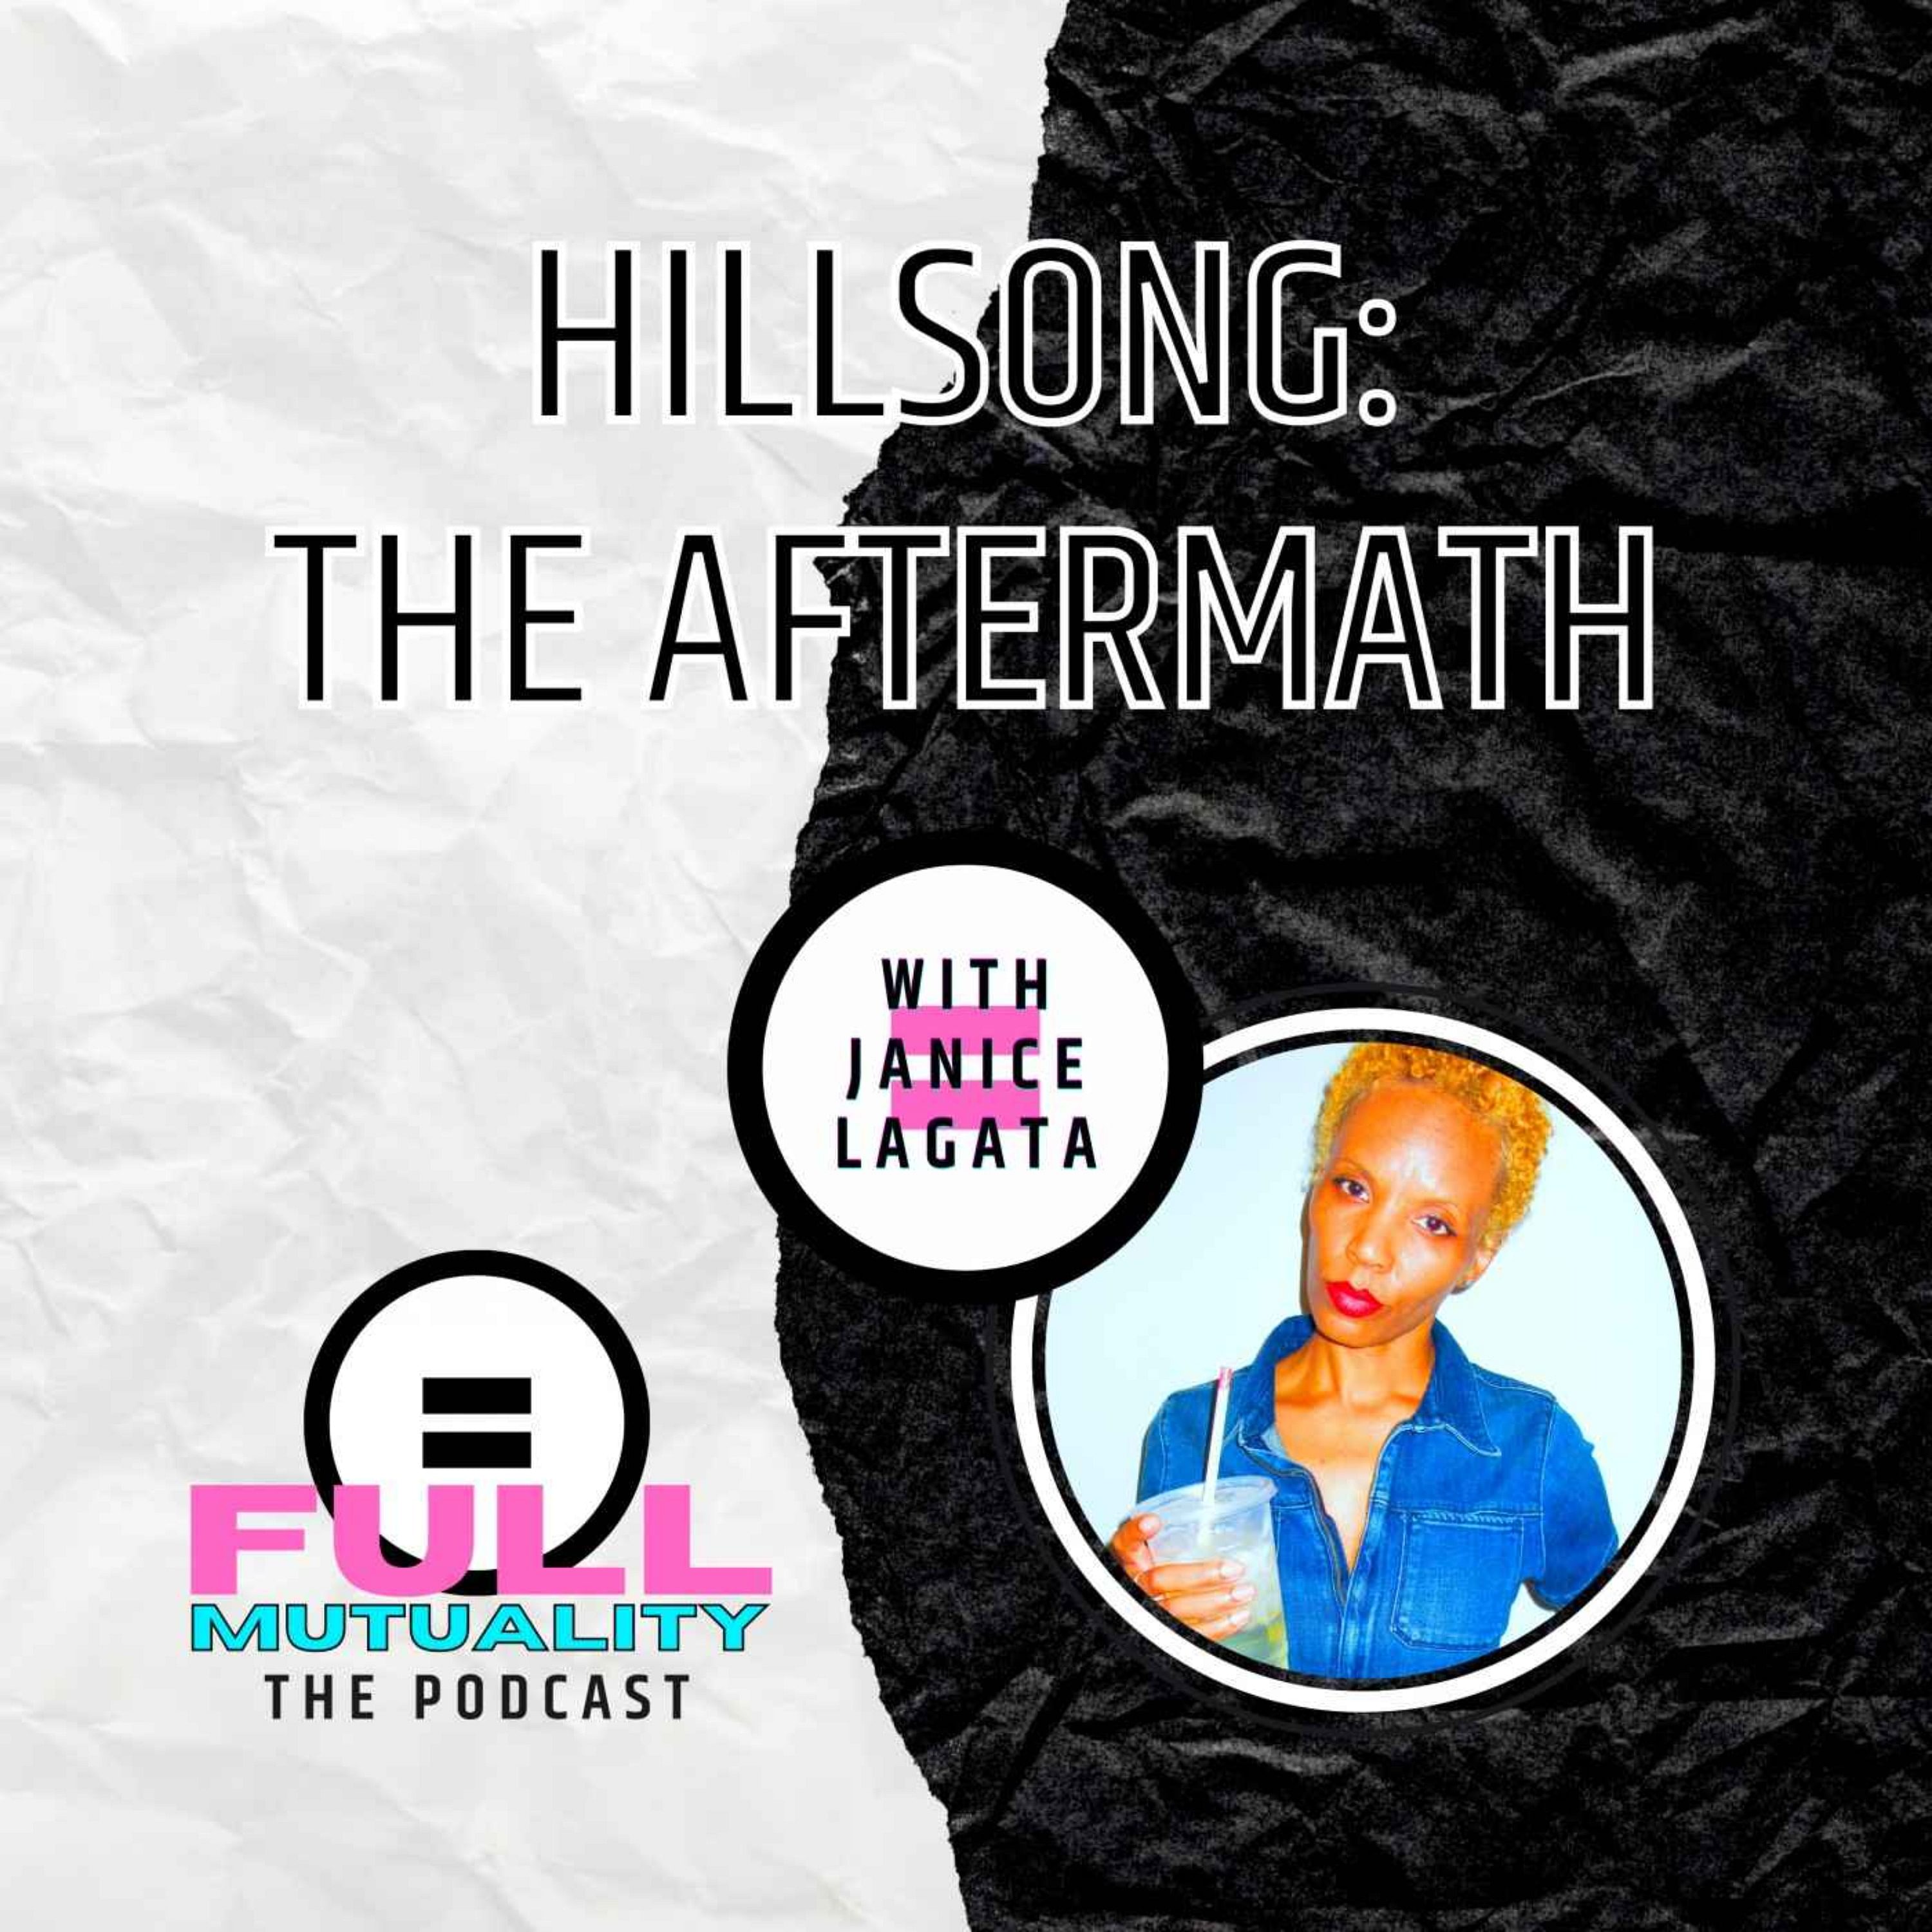 hillsong aftermath meaning